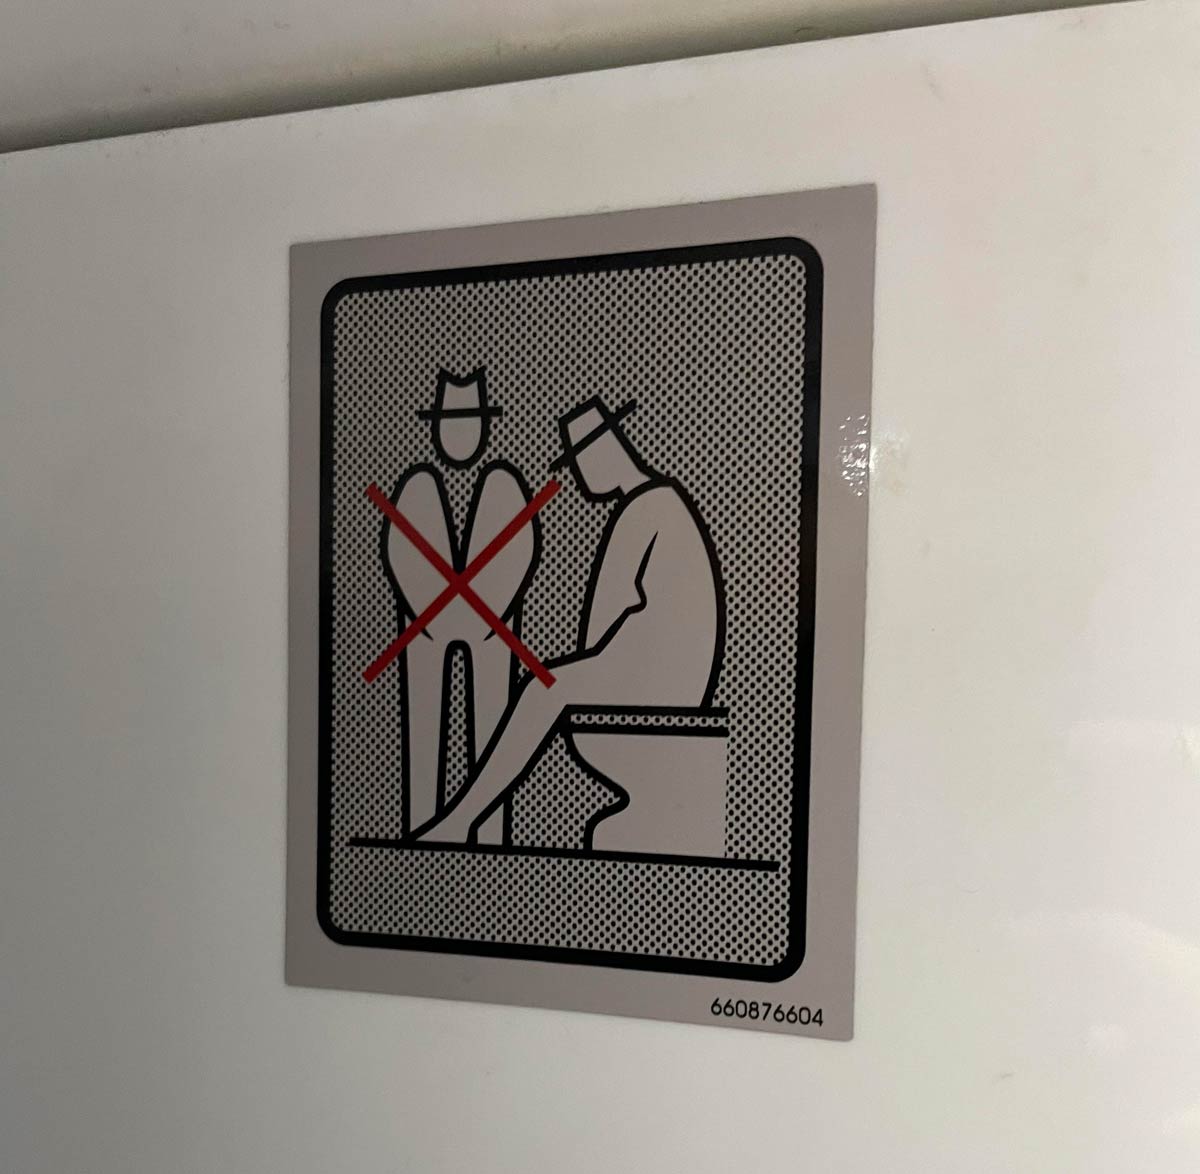 This sign in a bus bathroom forbidding an additional person from watching you poop